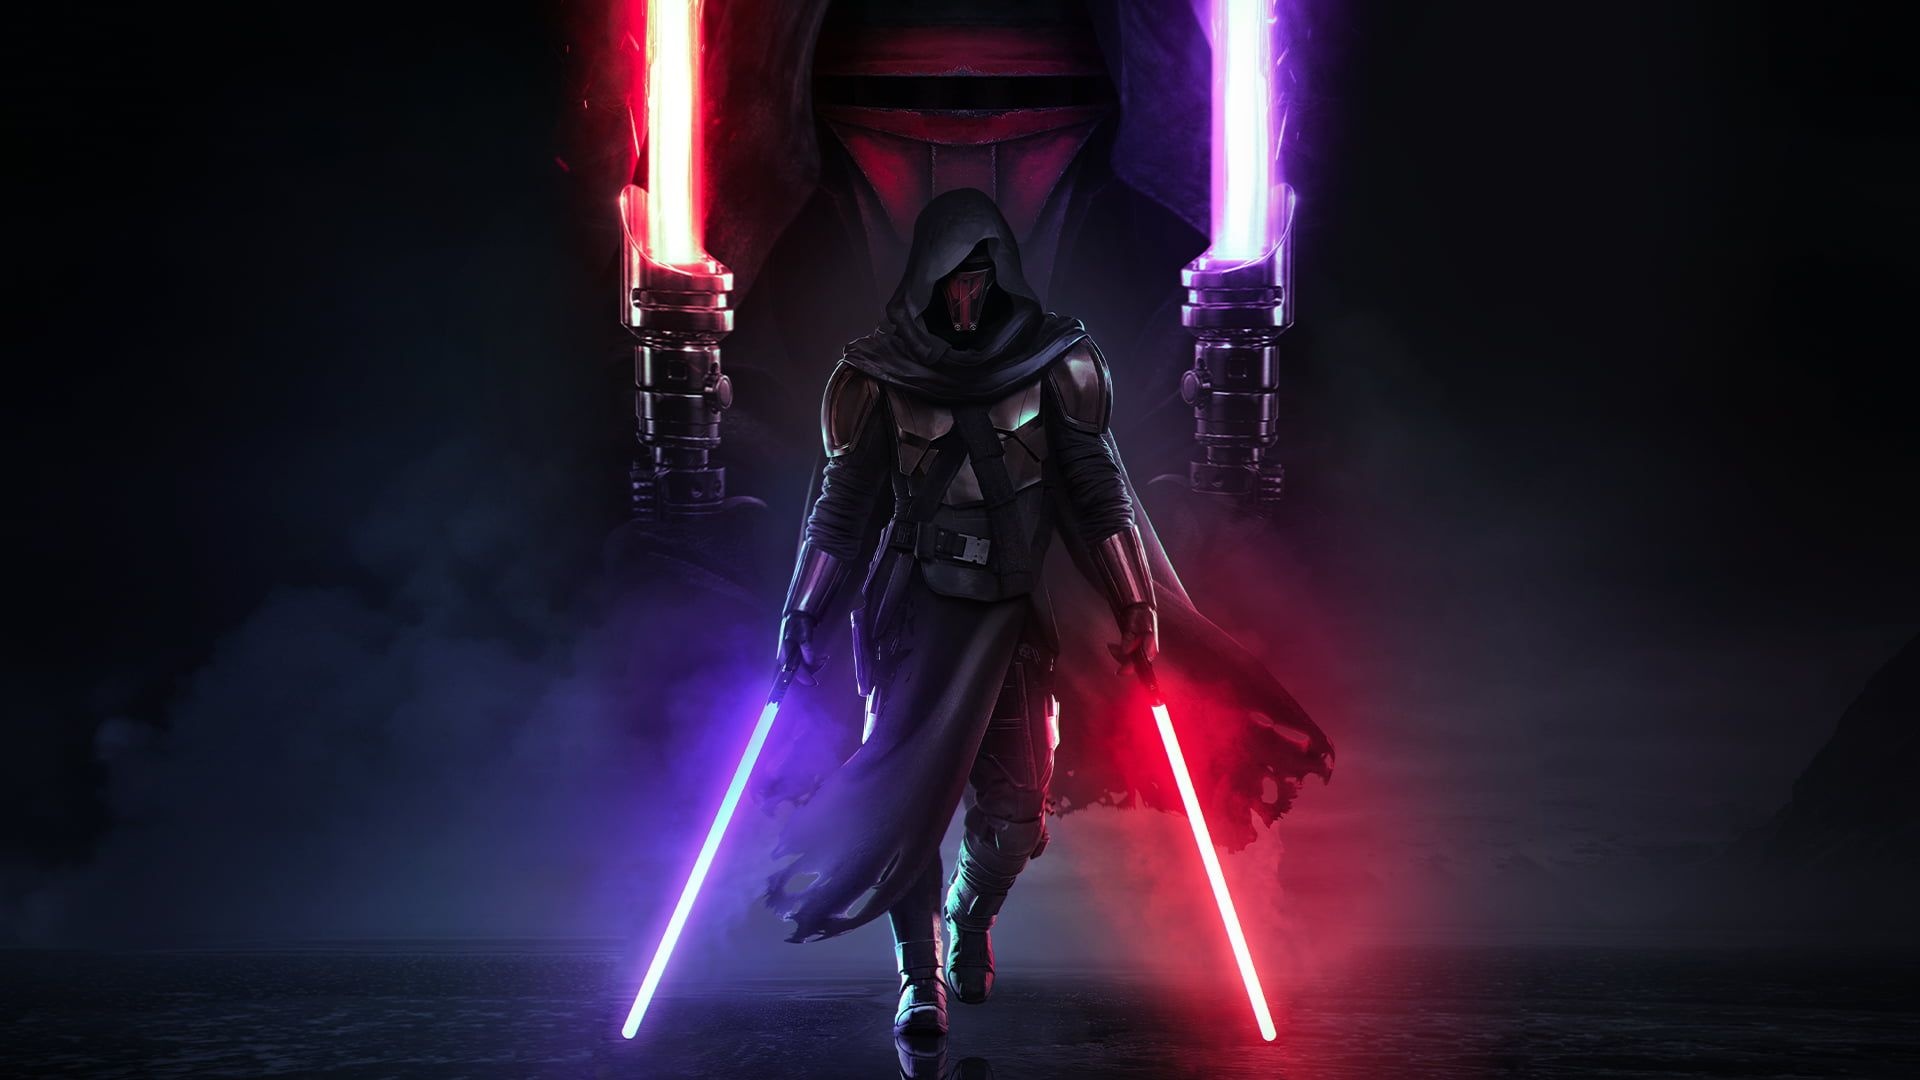 Darth Revan: Star Wars, Earned the Cross of Glory and the title of Prodigal Knight. 1920x1080 Full HD Background.